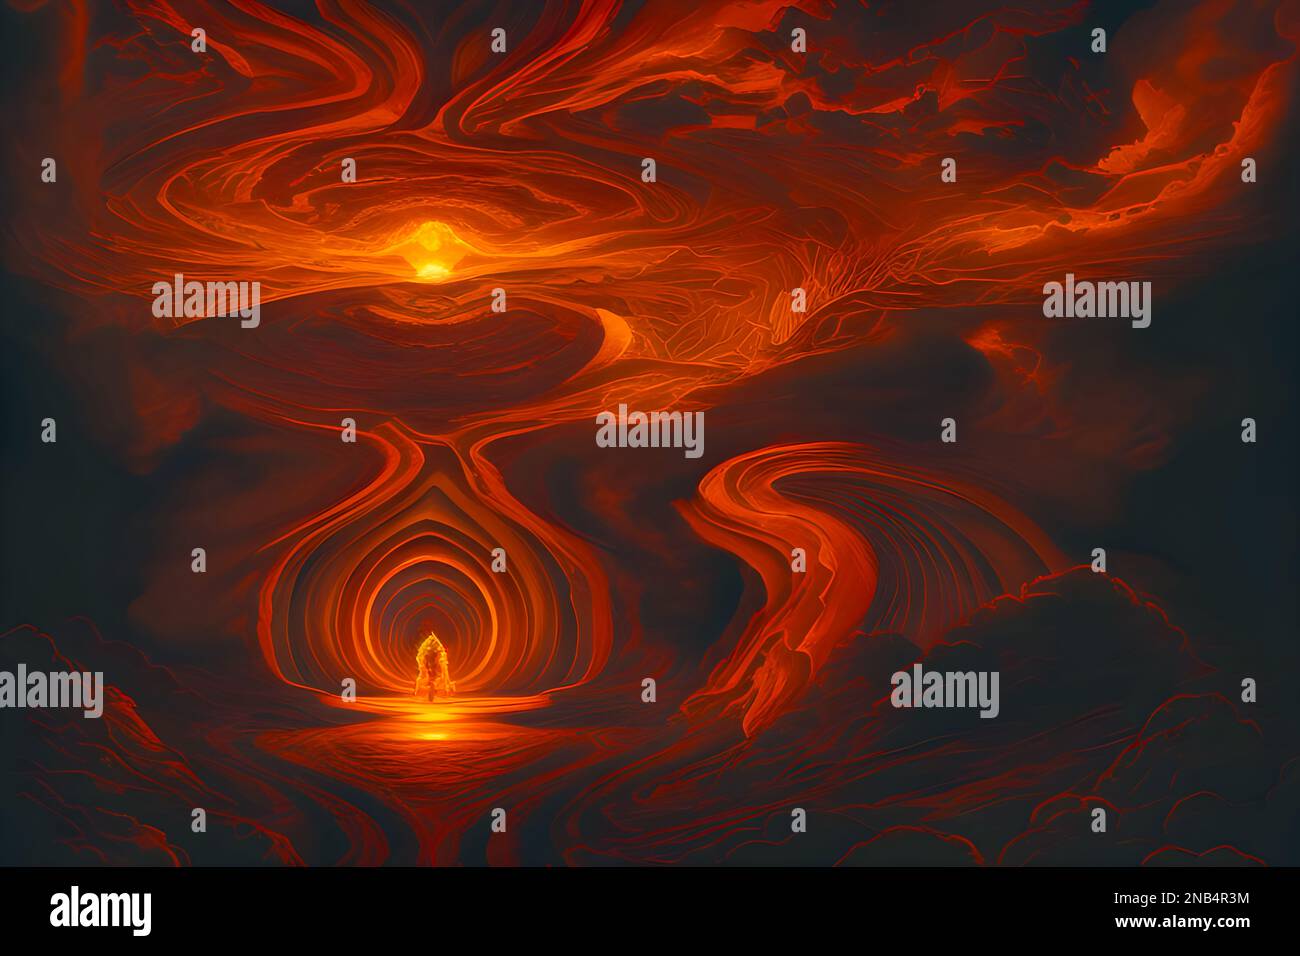 Abstract illustration of hell on earth inspired by Dante's Seventh Circle of Hell in a boiling river of blood from the Divine Comedy. Stock Photo